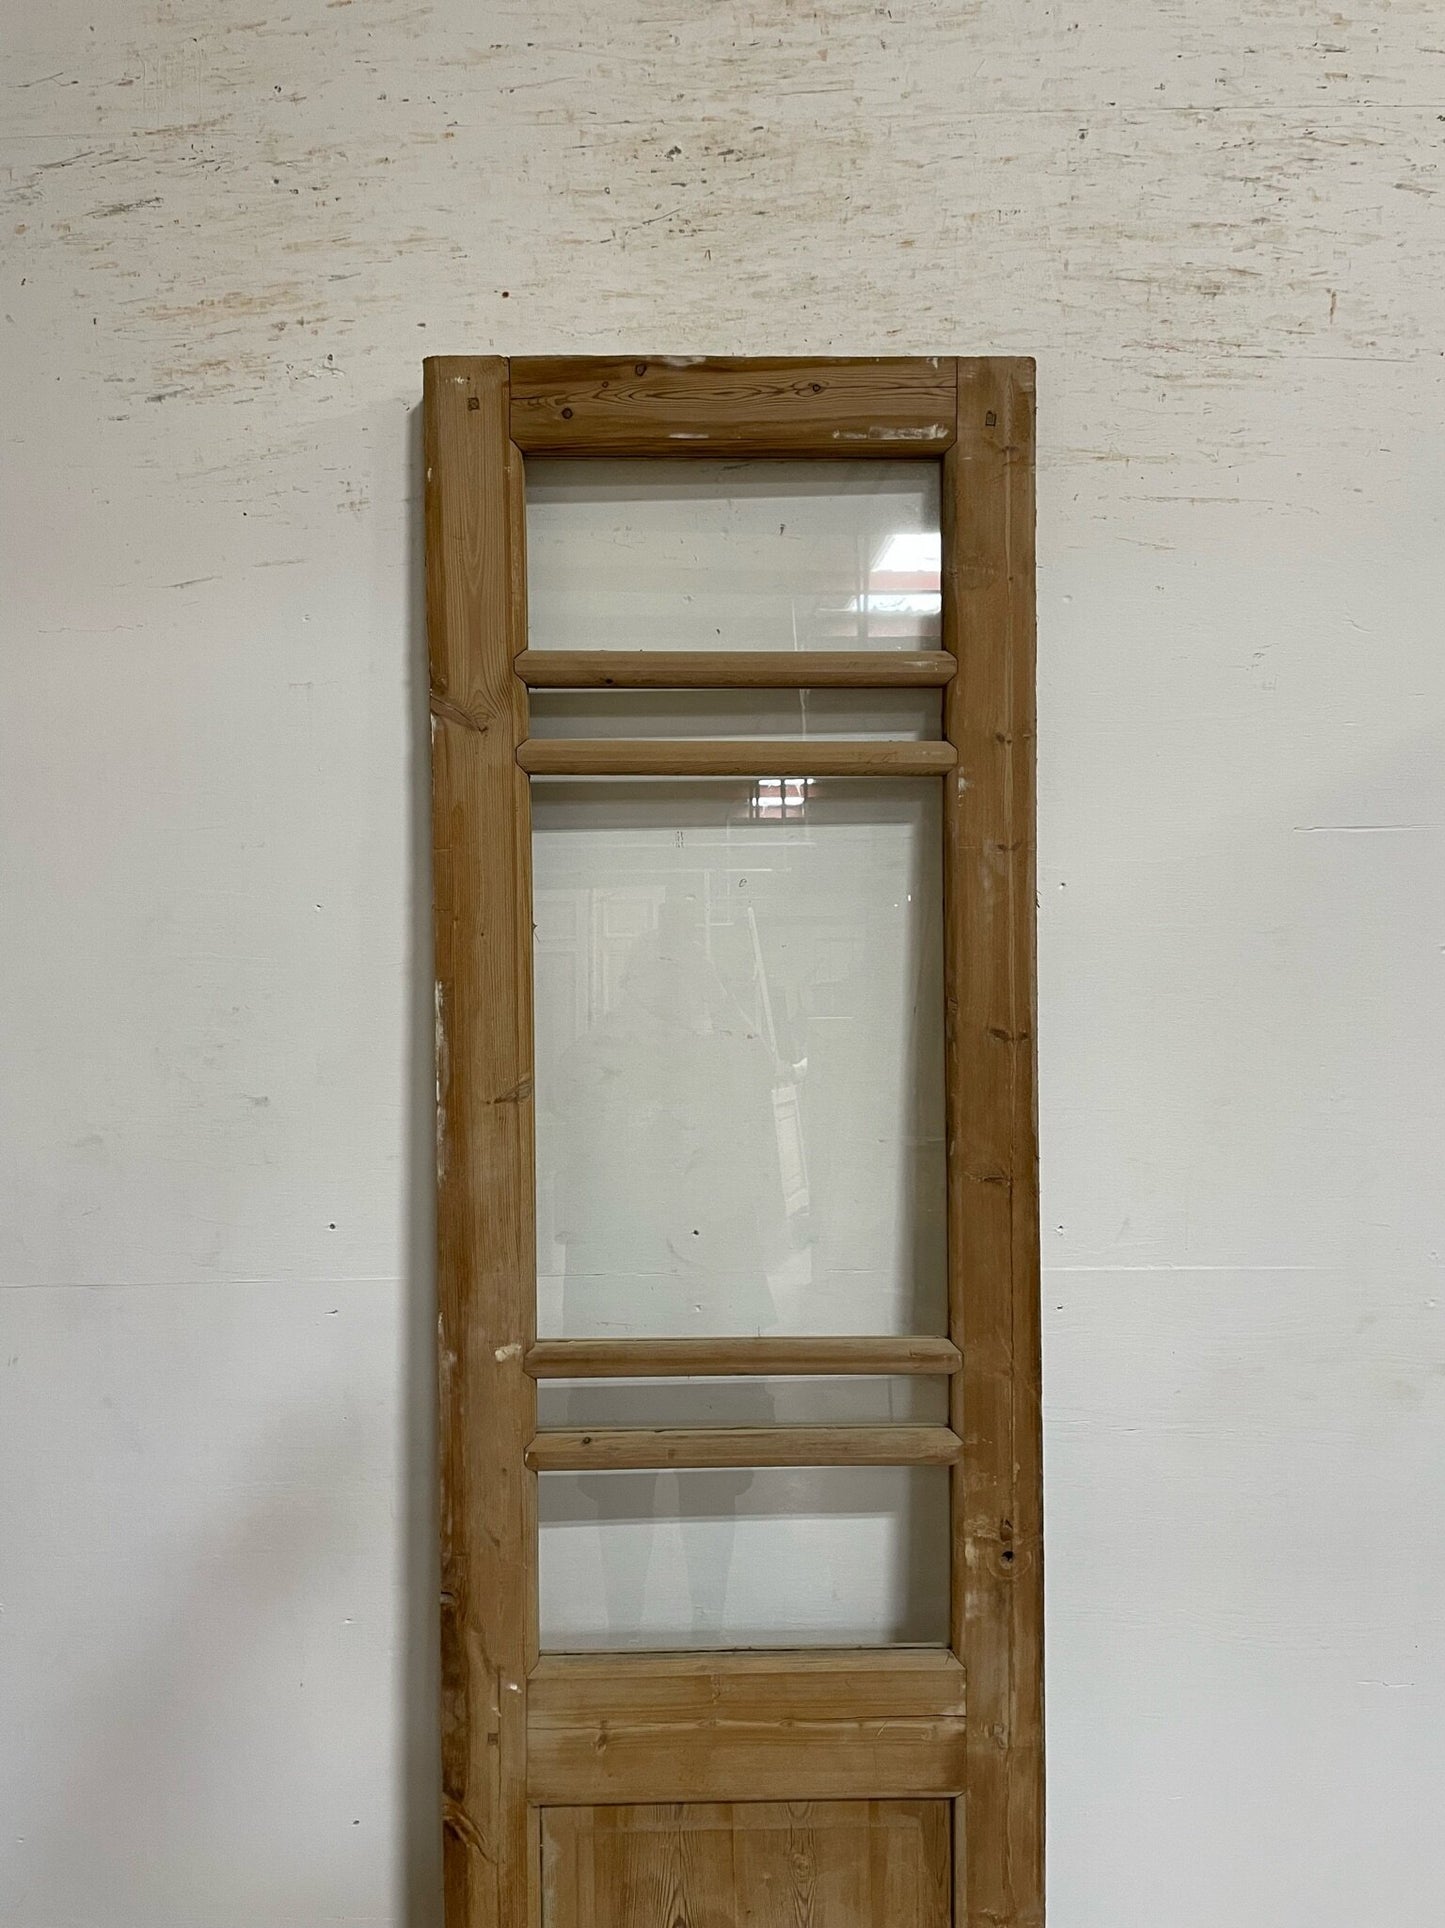 Antique French door (86.5x24.25) with glass F0879